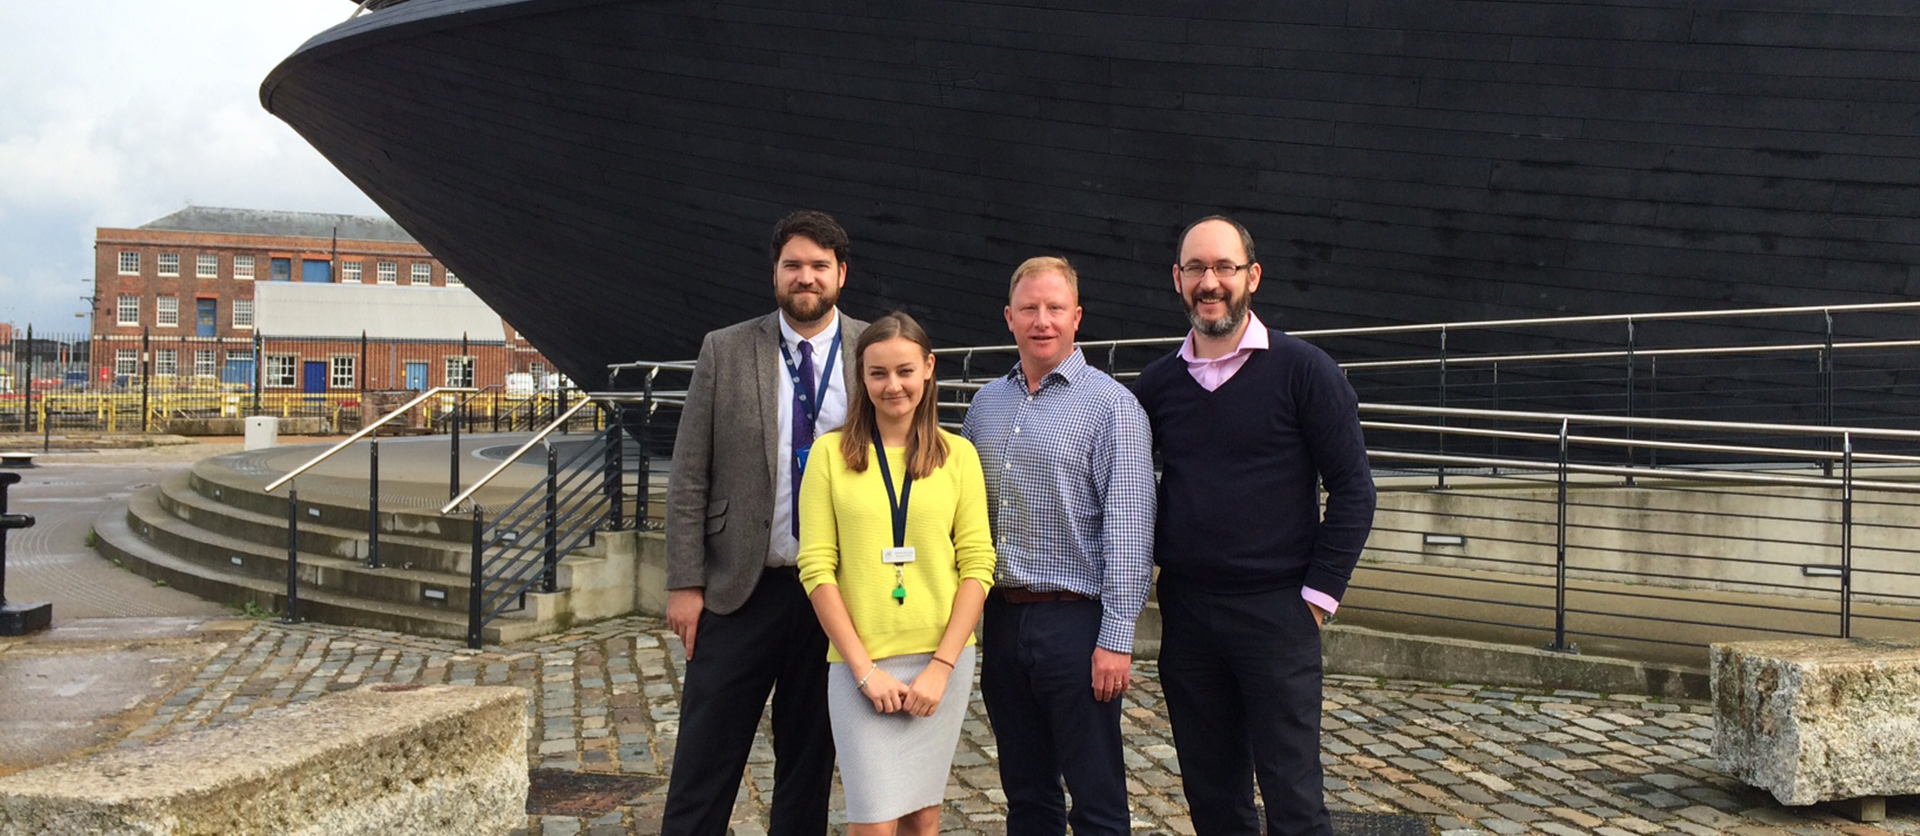 Karina Smulska standing outside the Mary Rose Museum with Paul Griffiths, Head of Operations, James Rodliff, Visitor Operations Manager, and Solent University employability adviser, Matt Williams